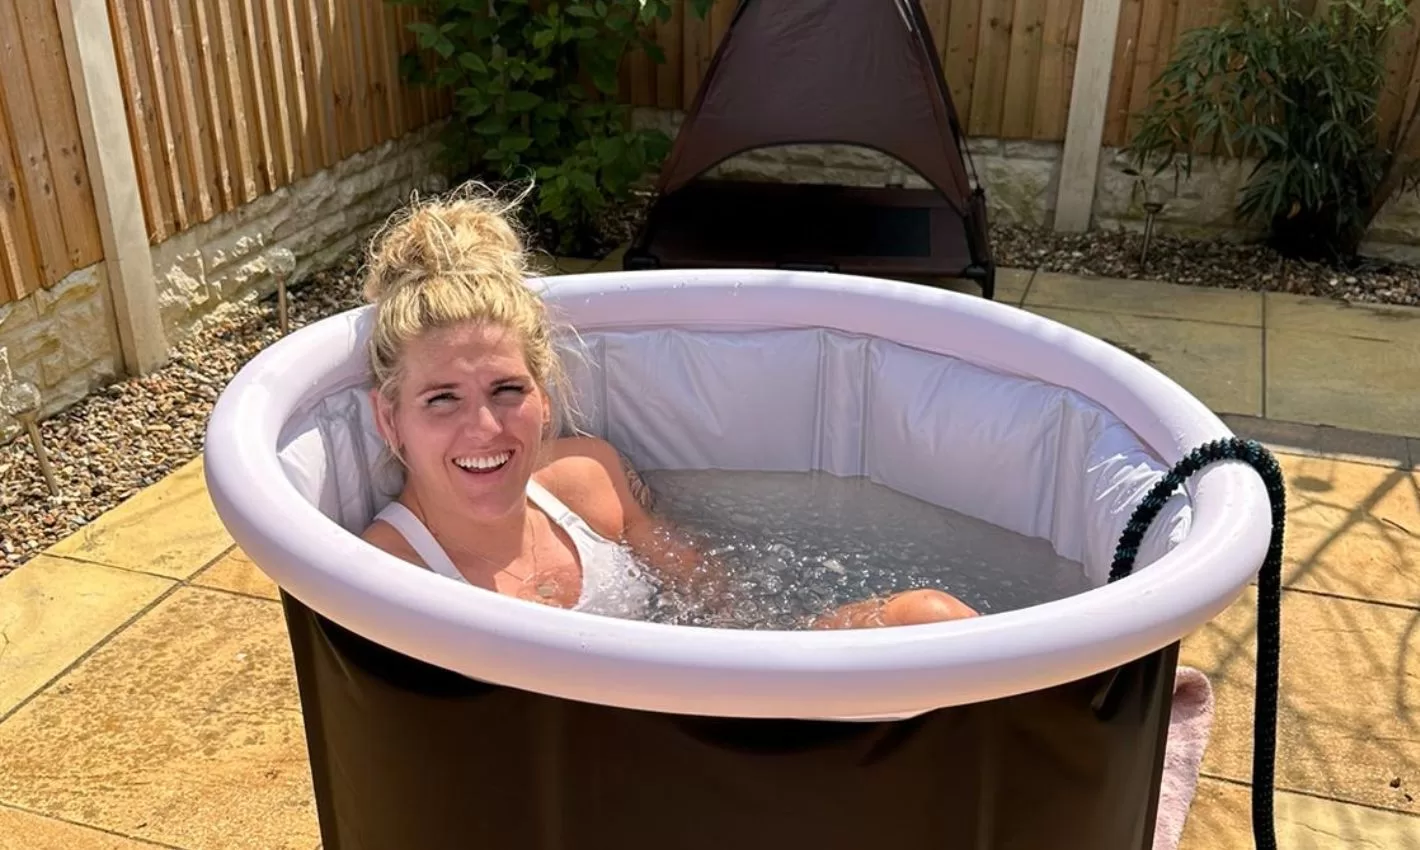 Millie bright takes the plunge with party ice